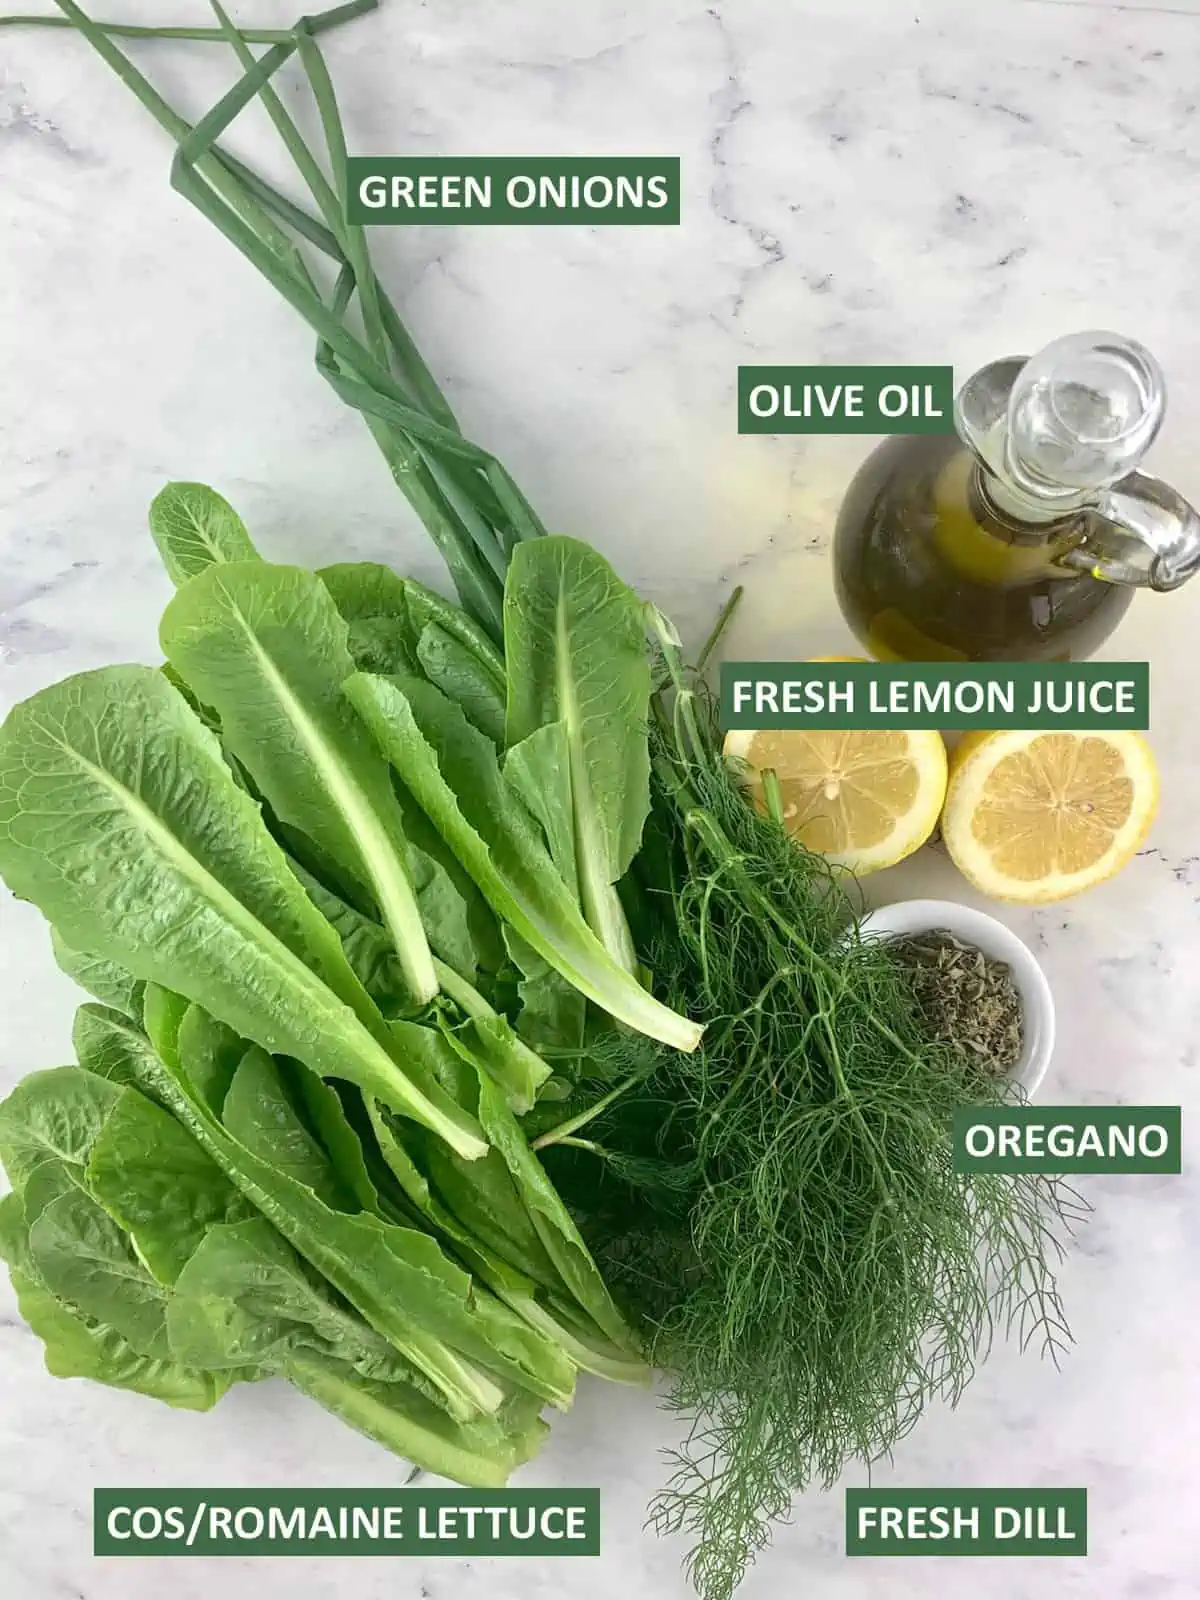 LABELLED INGREDIENTS NEEDED FOR MAROULOSALATA 